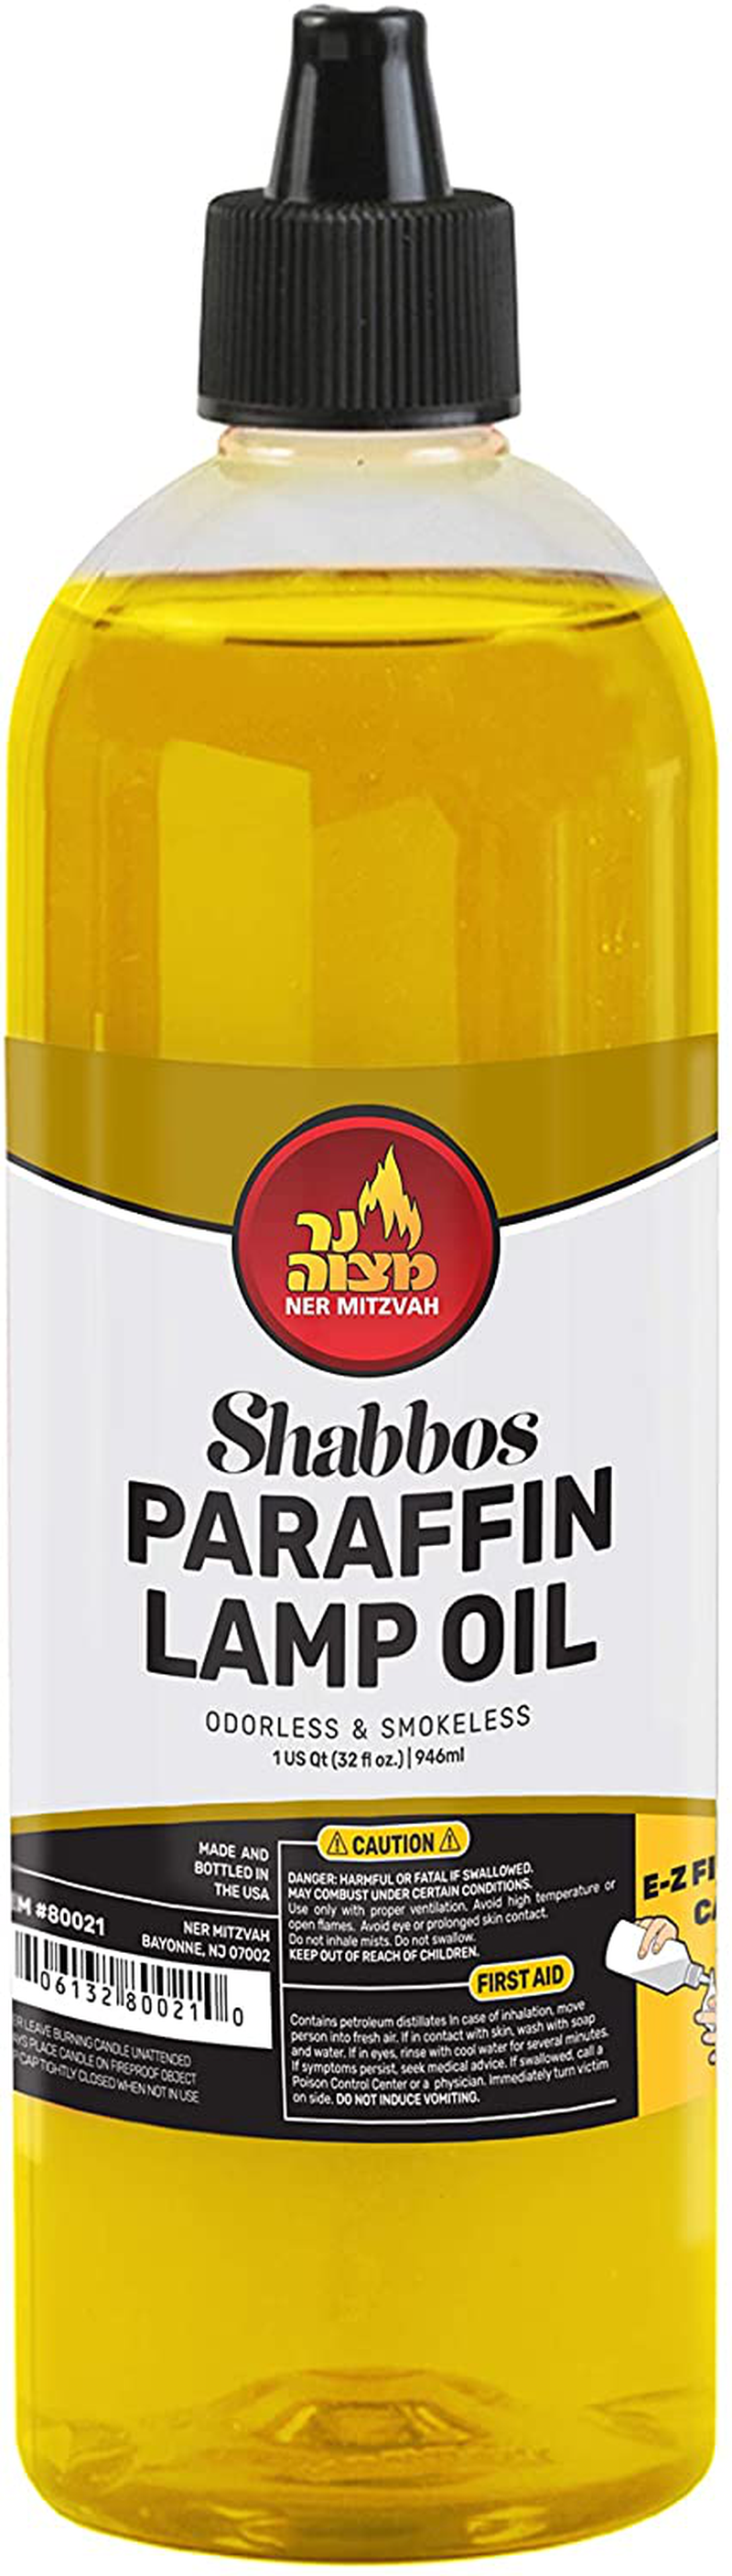 Ner Mitzvah Paraffin Lamp Oil - Yellow Smokeless, Odorless, Clean Burning Fuel for Indoor and Outdoor Use with E-Z Fill Cap and Pouring Spout - 32oz Home & Garden > Lighting Accessories > Oil Lamp Fuel Ner Mitzvah Default Title  